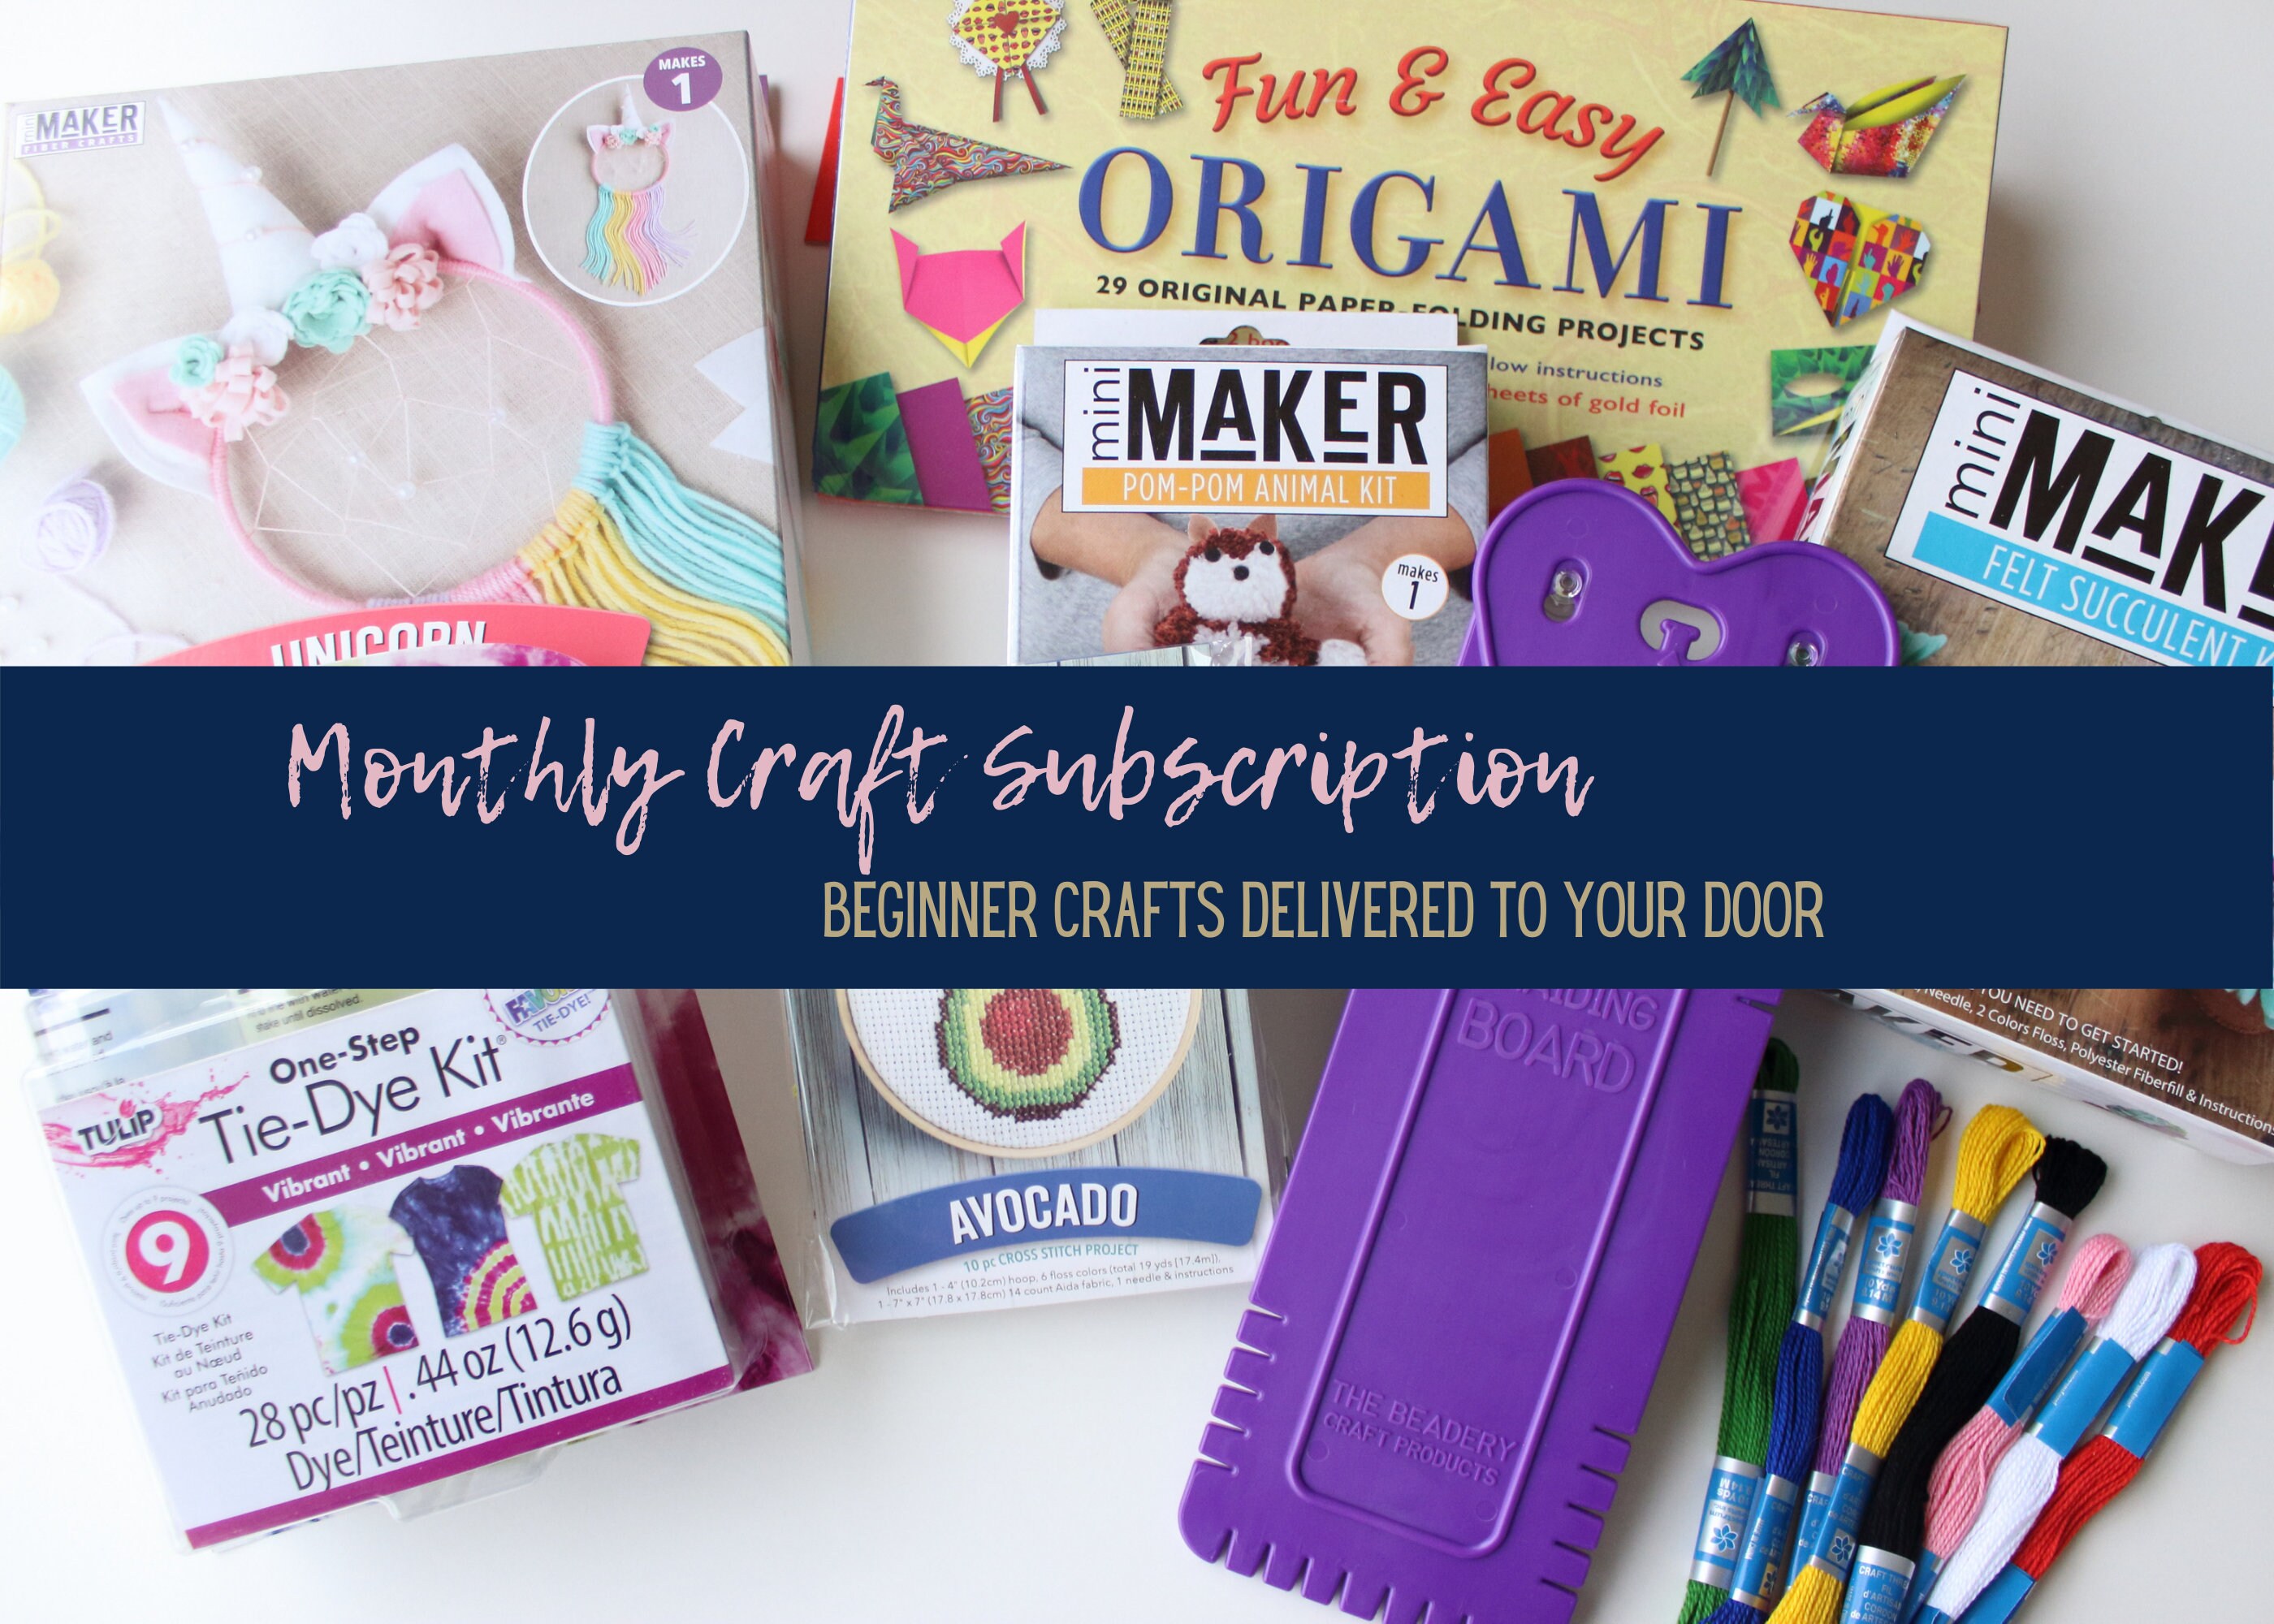 15 Unique Craft Kits for Adults  Monthly crafts, Daily crafts, Monthly  craft kits